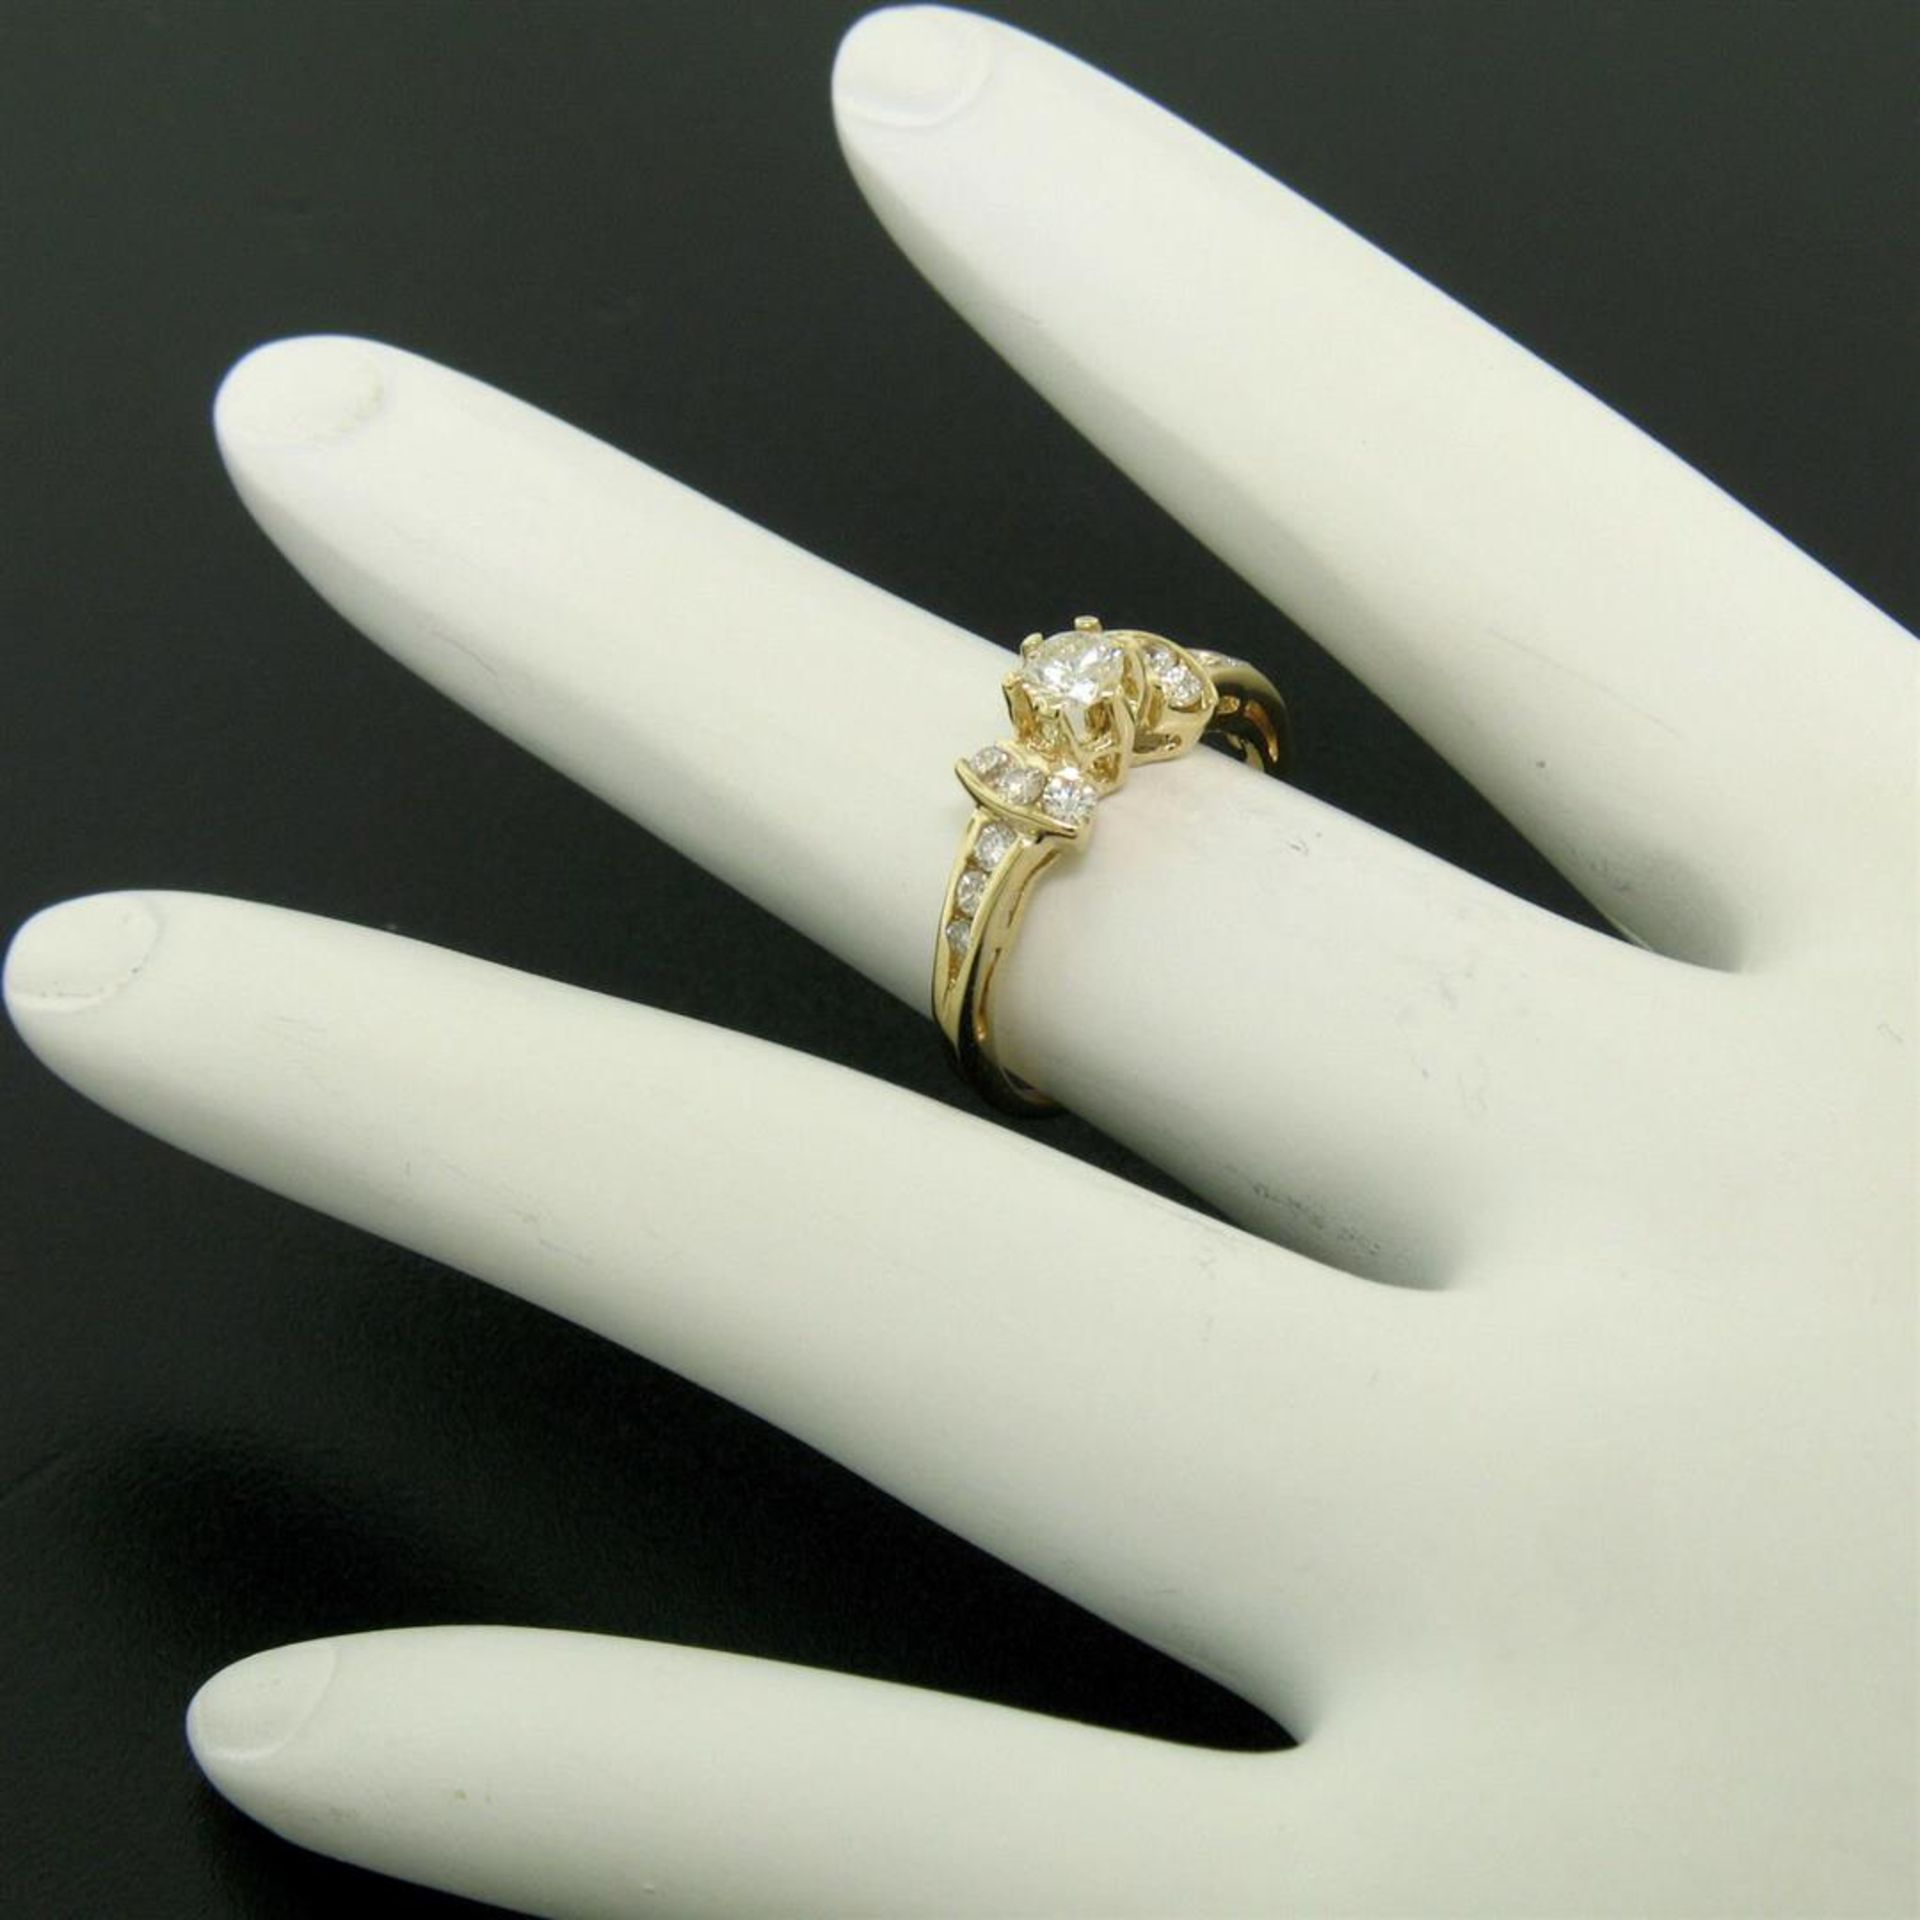 14k Yellow Gold Petite 0.42 ctw Round Diamond Engagement Ring w/ Channel Accents - Image 7 of 8